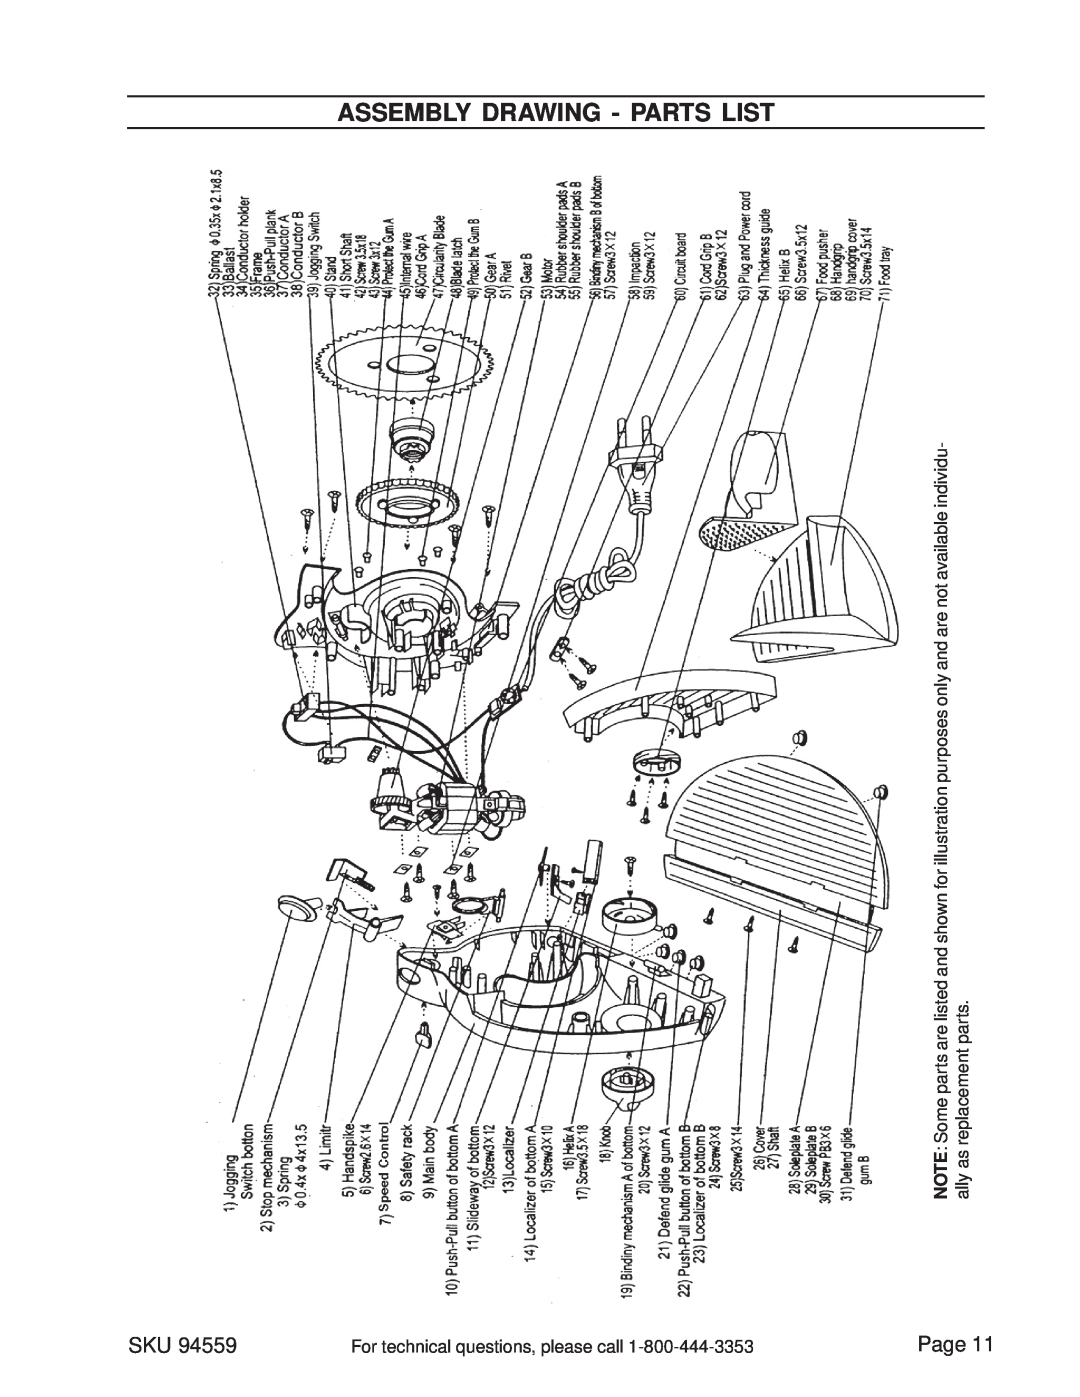 Harbor Freight Tools 94559 manual Assembly Drawing - Parts List, Page, individu, replacement parts, ally as 